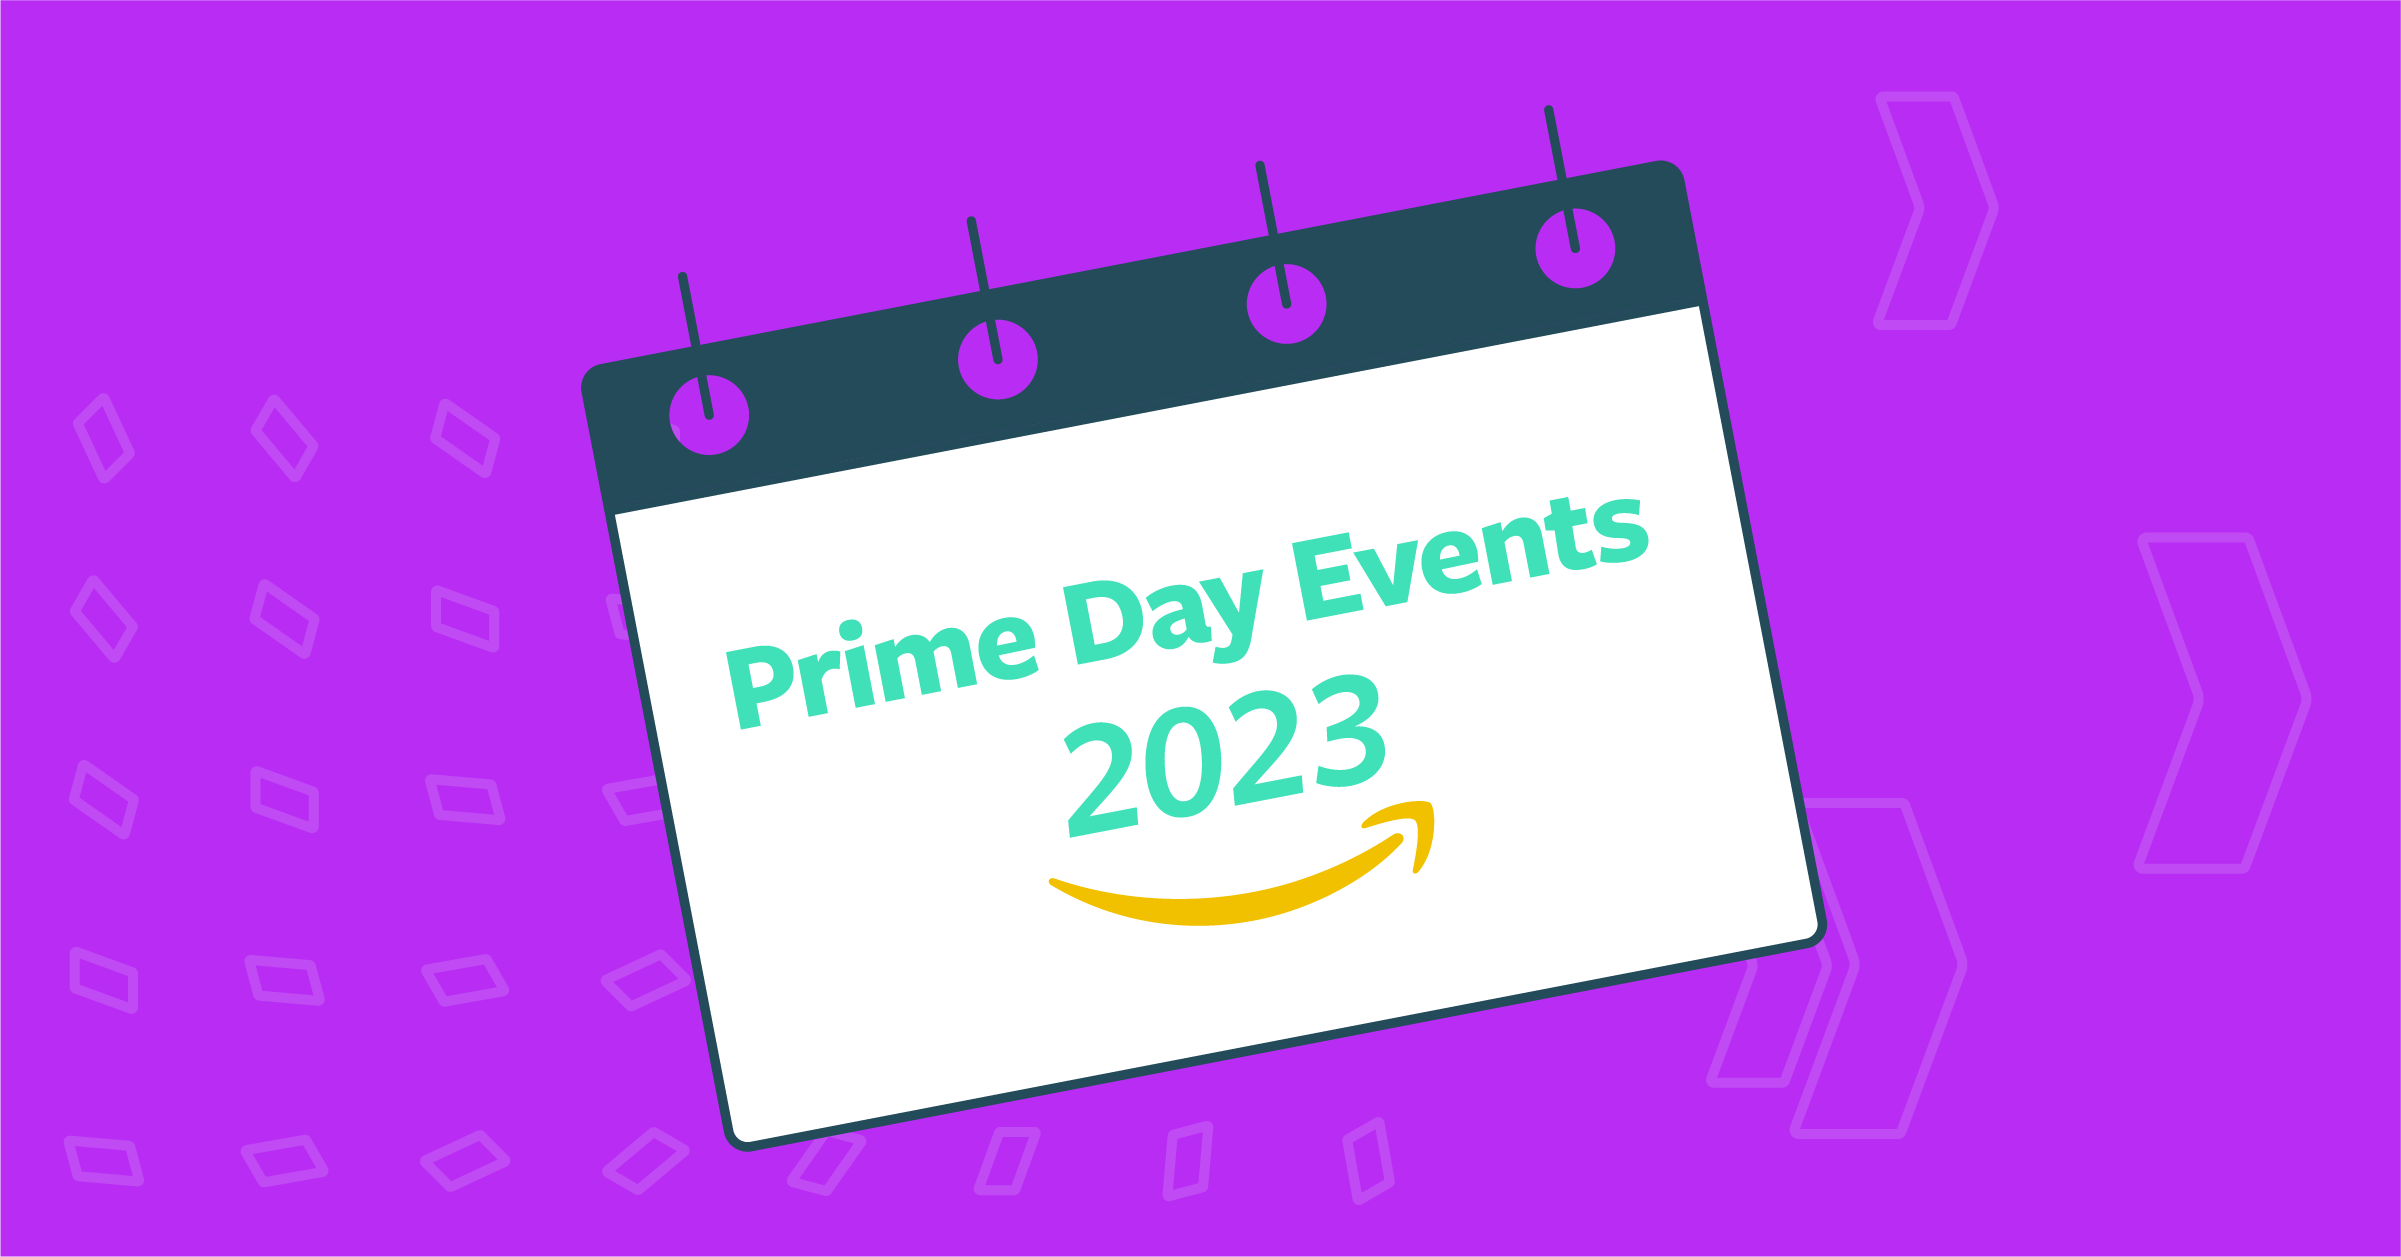 https://www.supplykick.com/hubfs/Blog-2023-Prime-Day-Events.png#keepProtocol